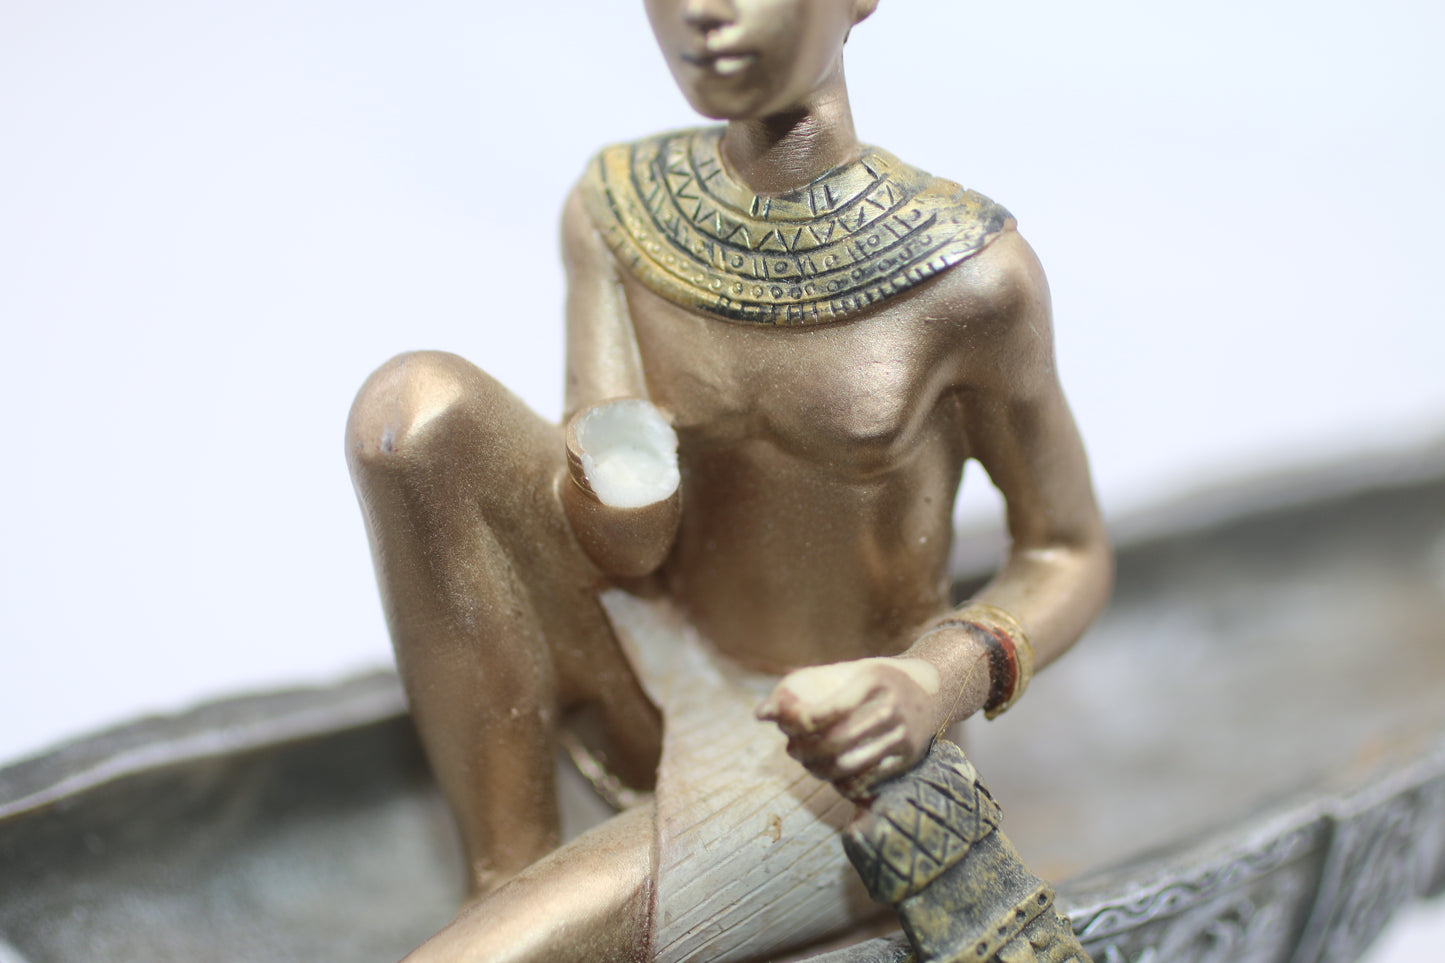 Goddess Isis on The Nile Statue Egypt, Queen Cleopatra Lotus Boat, Collectable.